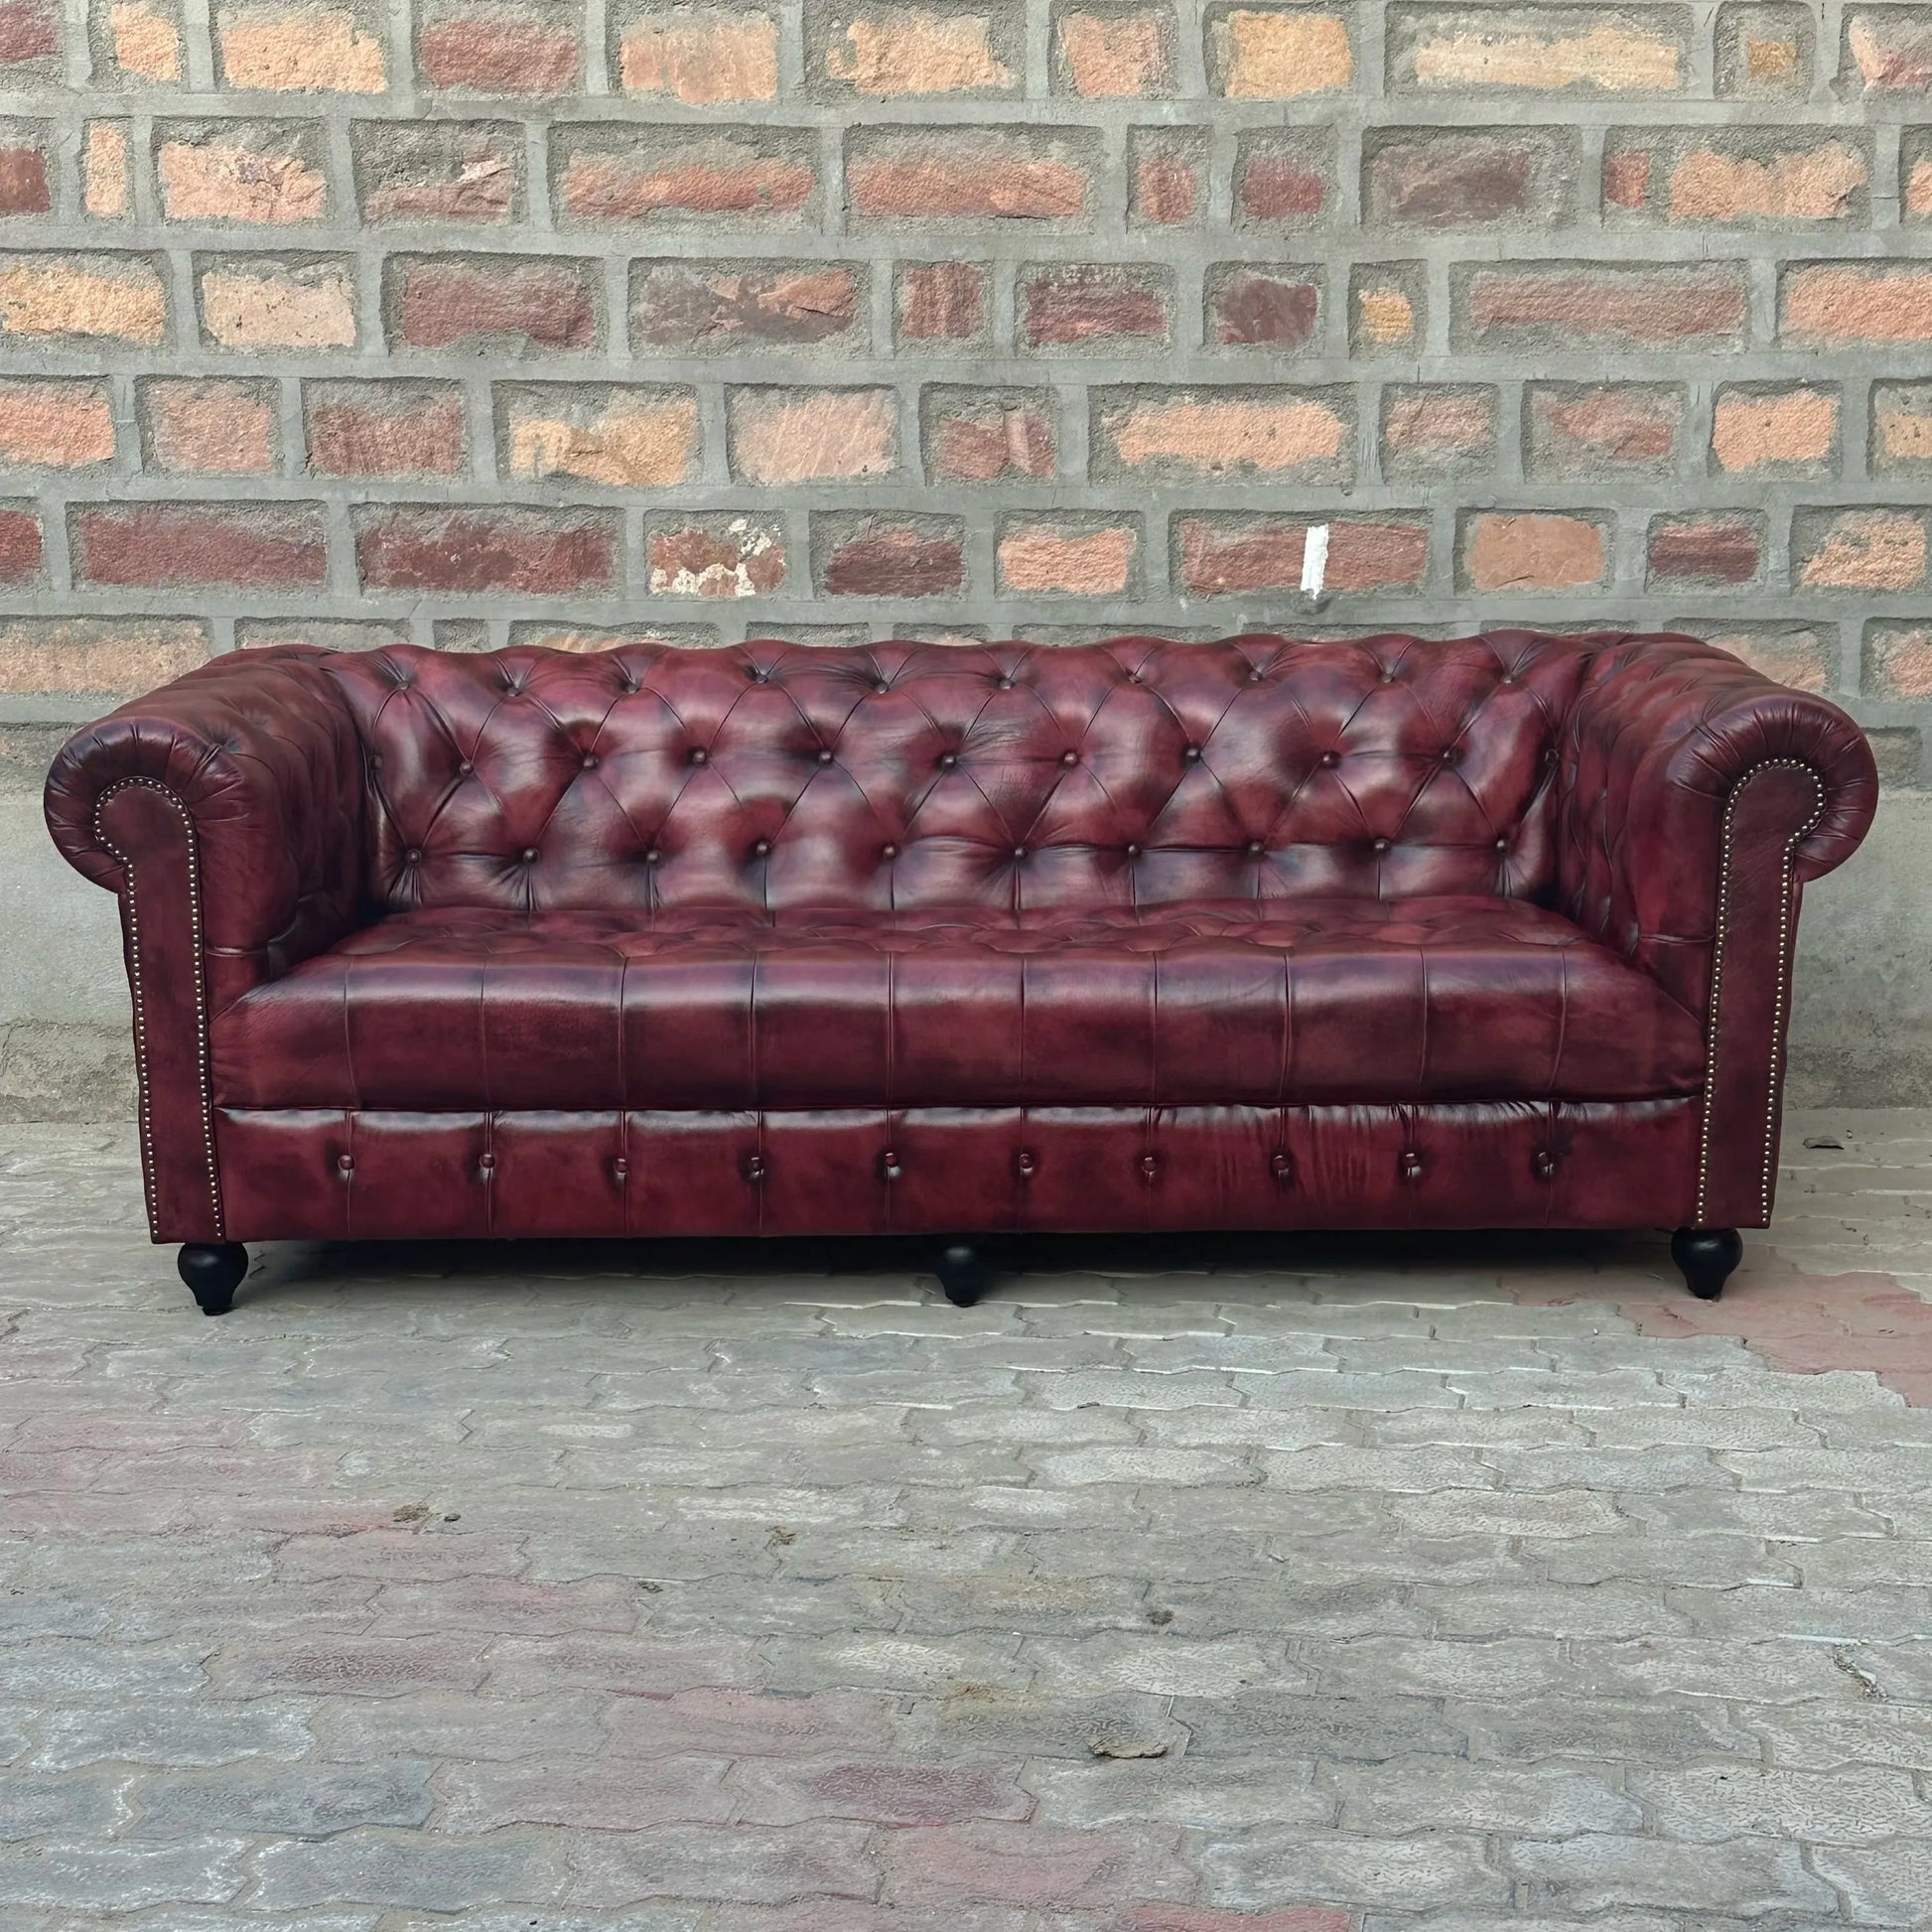 87" Sofa Tufted Bench | Oxford Red Chesterfield Leather Sofa with Tufted Bench Seat (OR-3T) by Rising Tide Design Co.